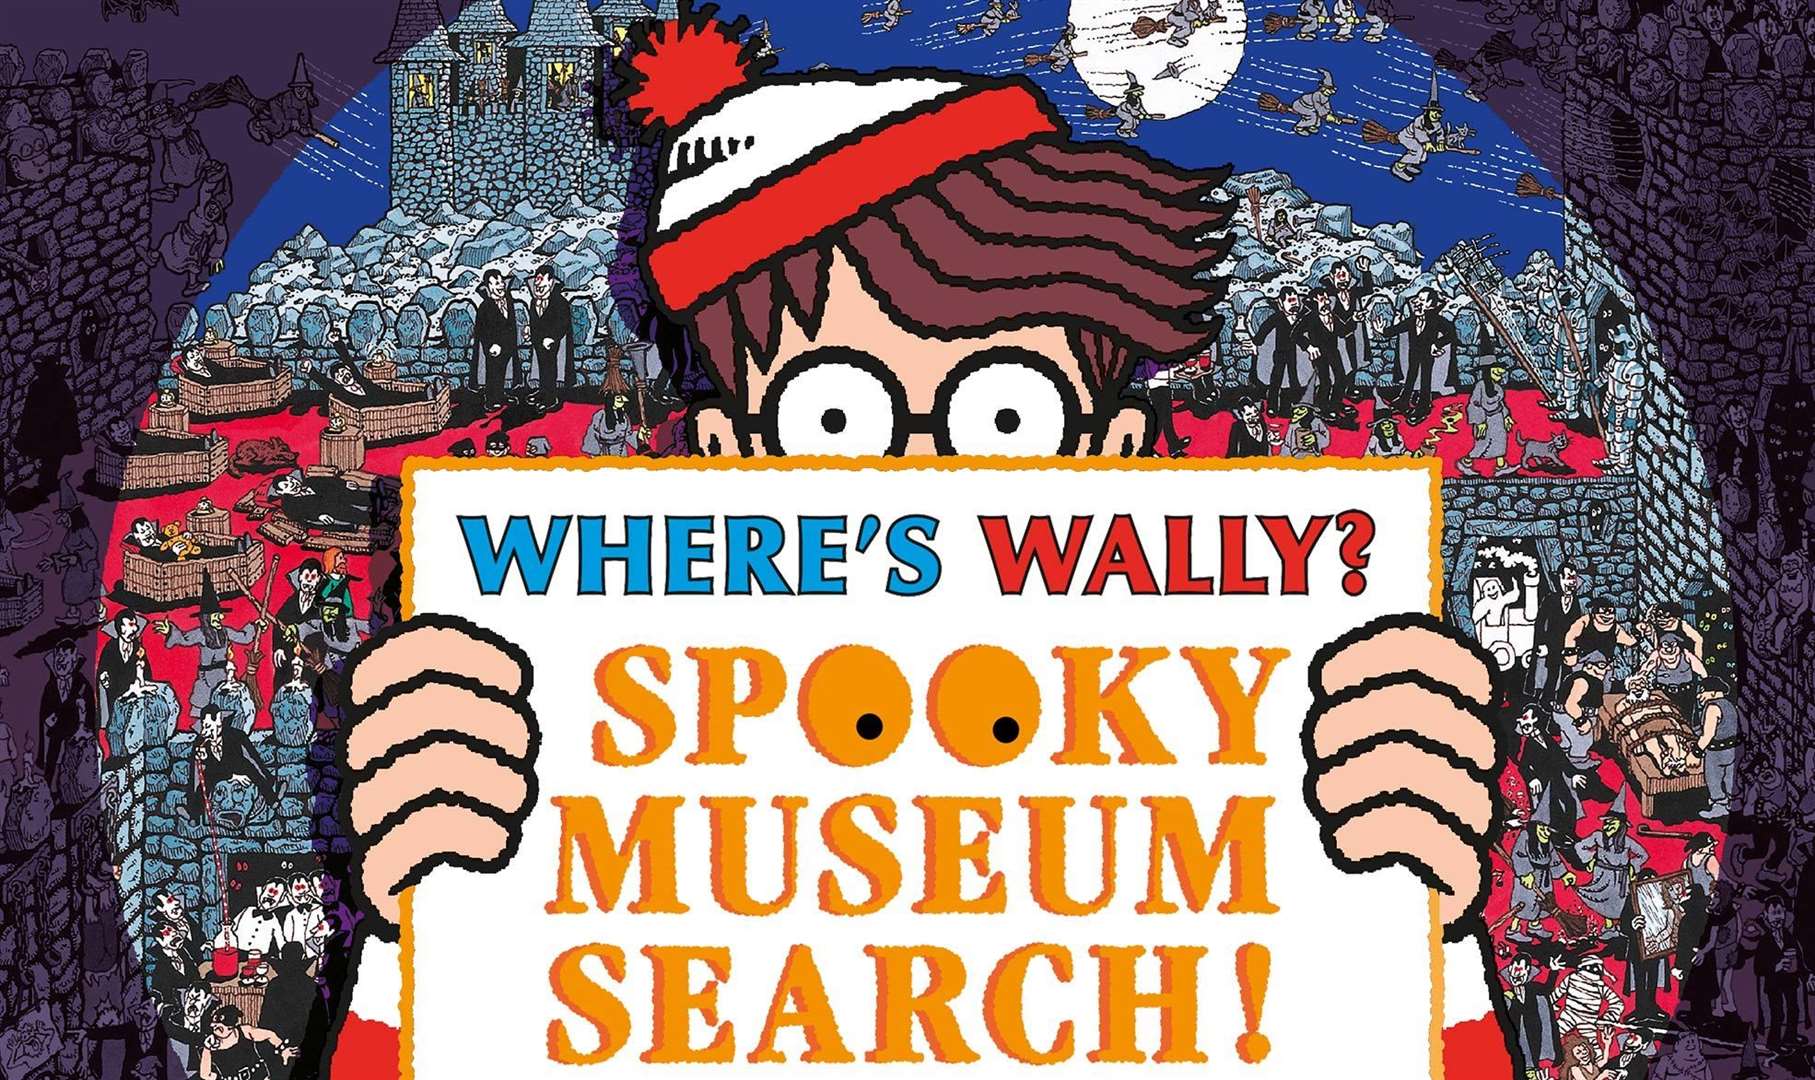 The Where's Wally Spooky Museum Search is in Chatham